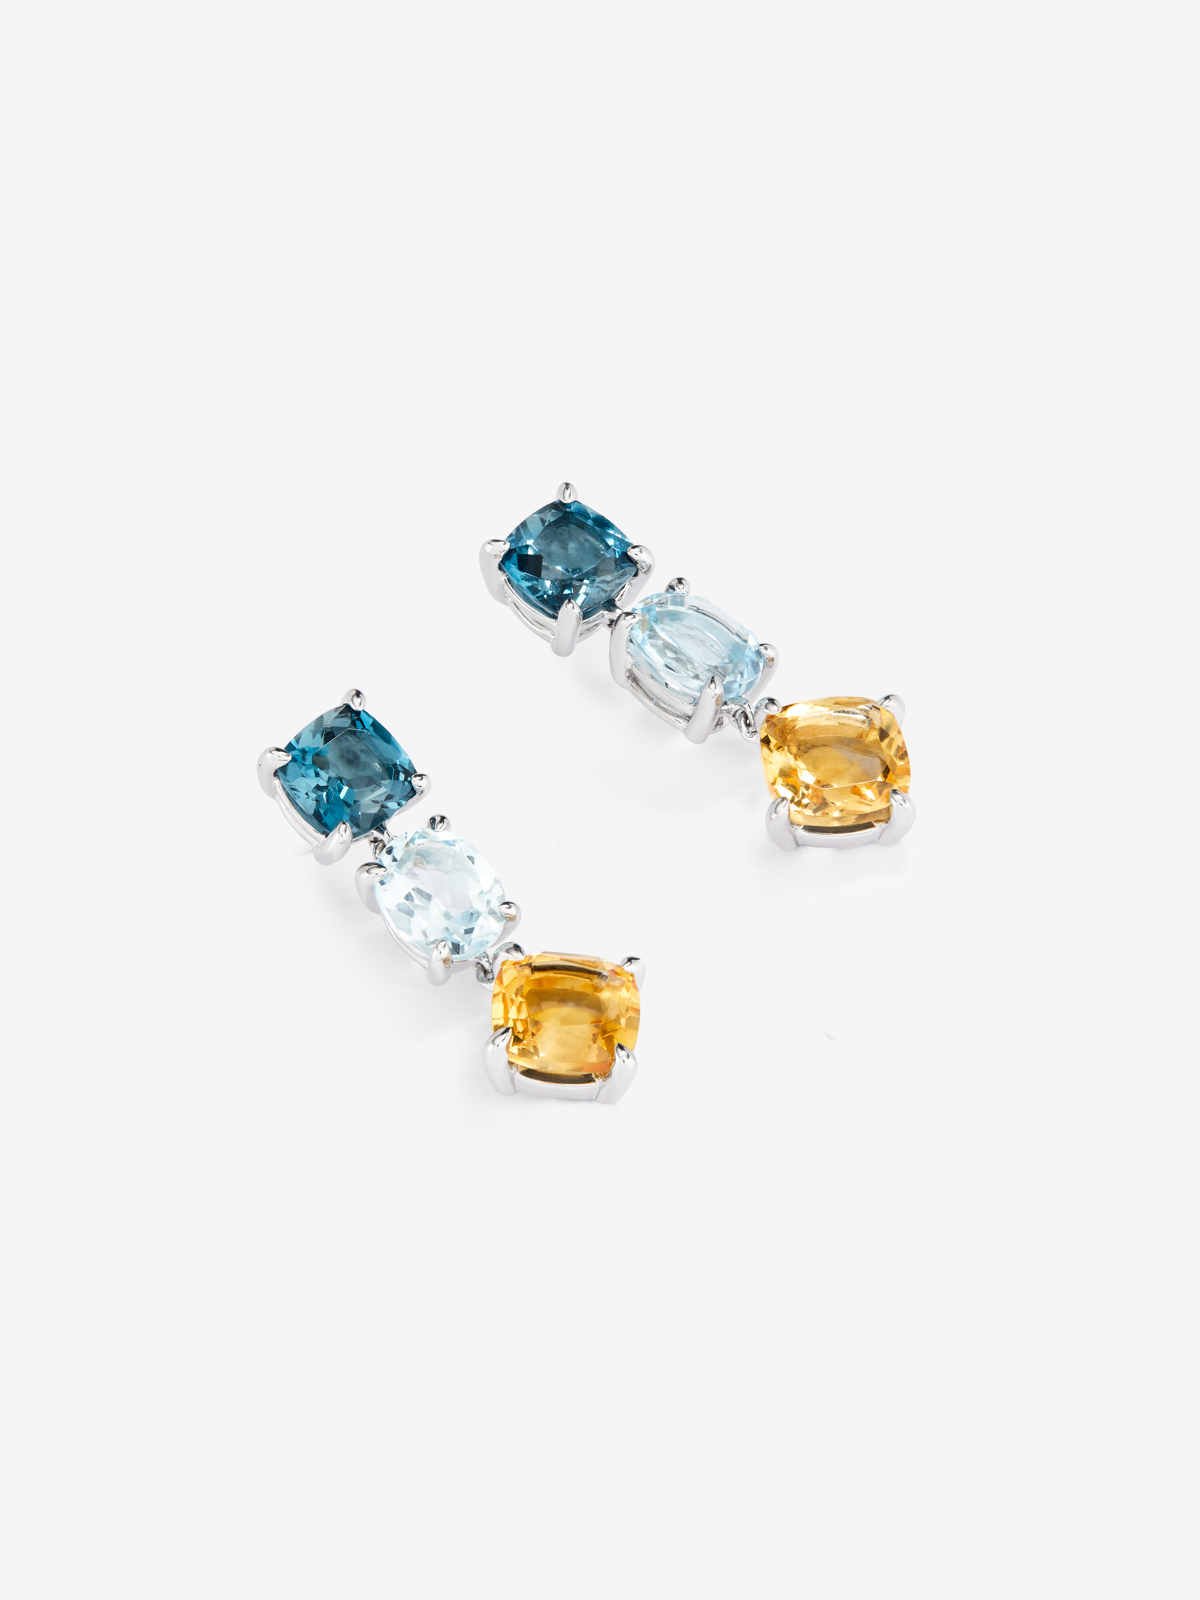 925 Silver Long Earrings with Topaz and Citrine